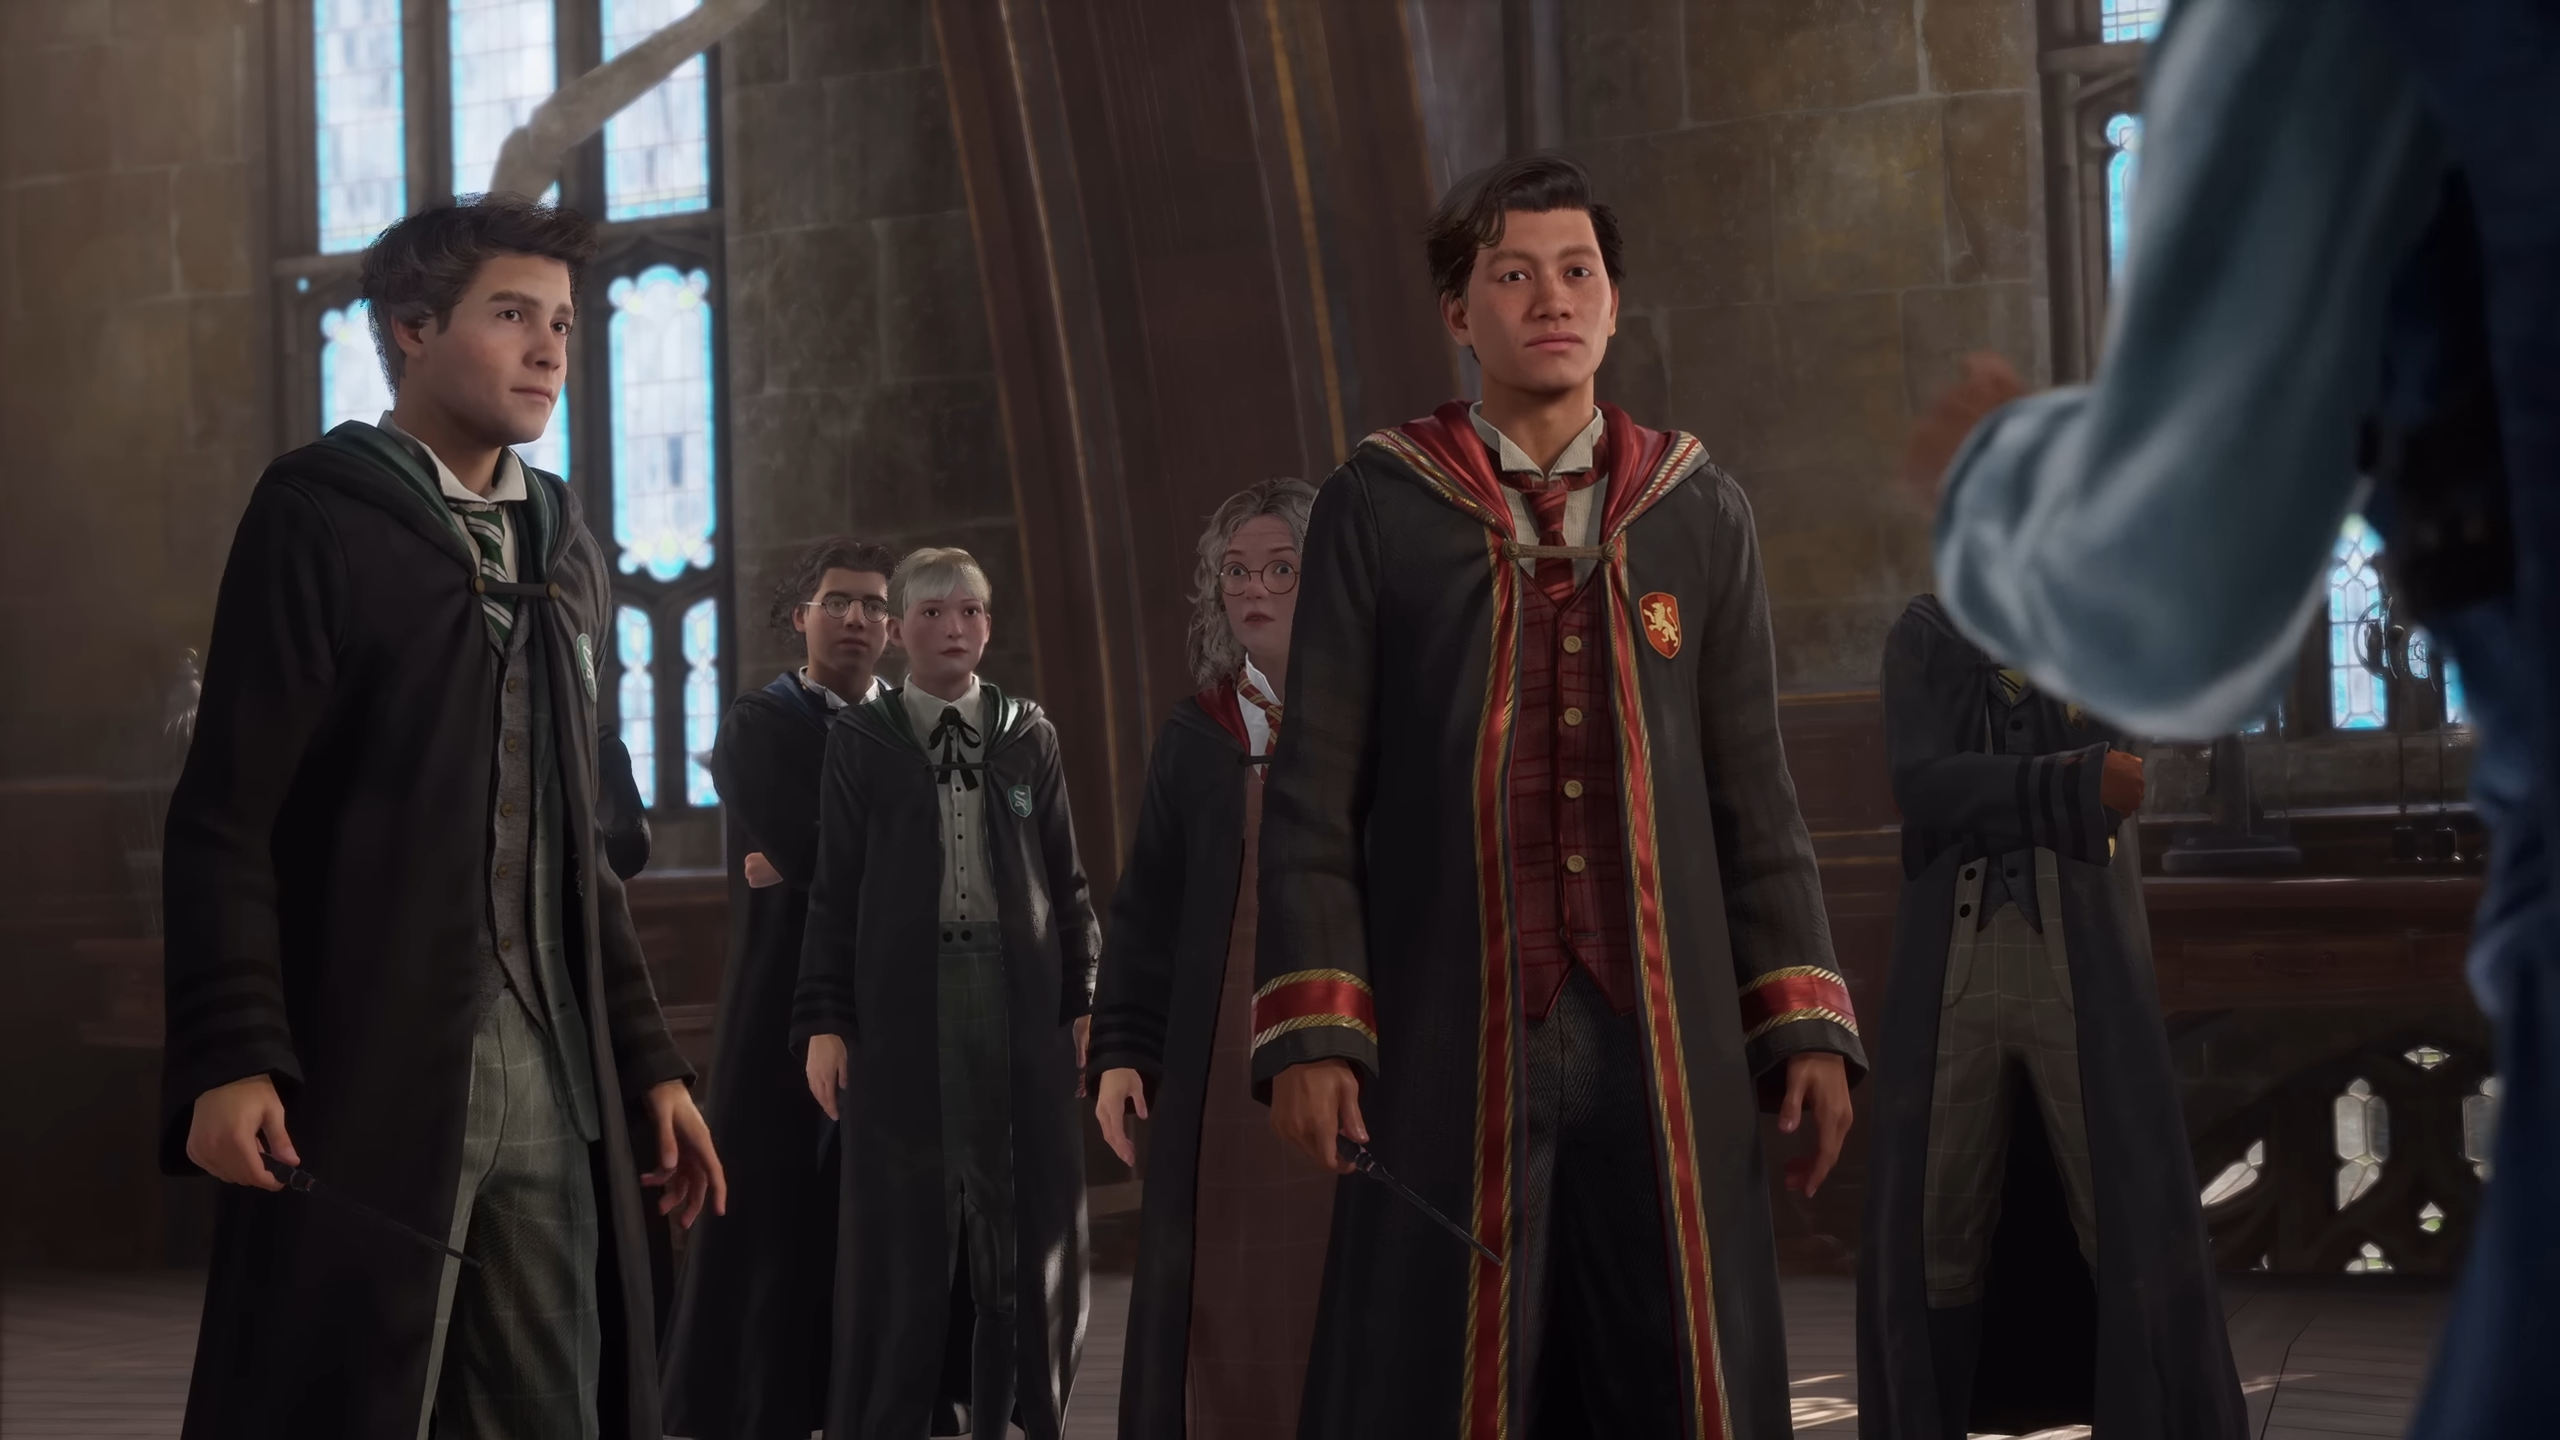 How to get Slytherin on Hogwarts Legacy (Harry Potter Fan Club), 2023